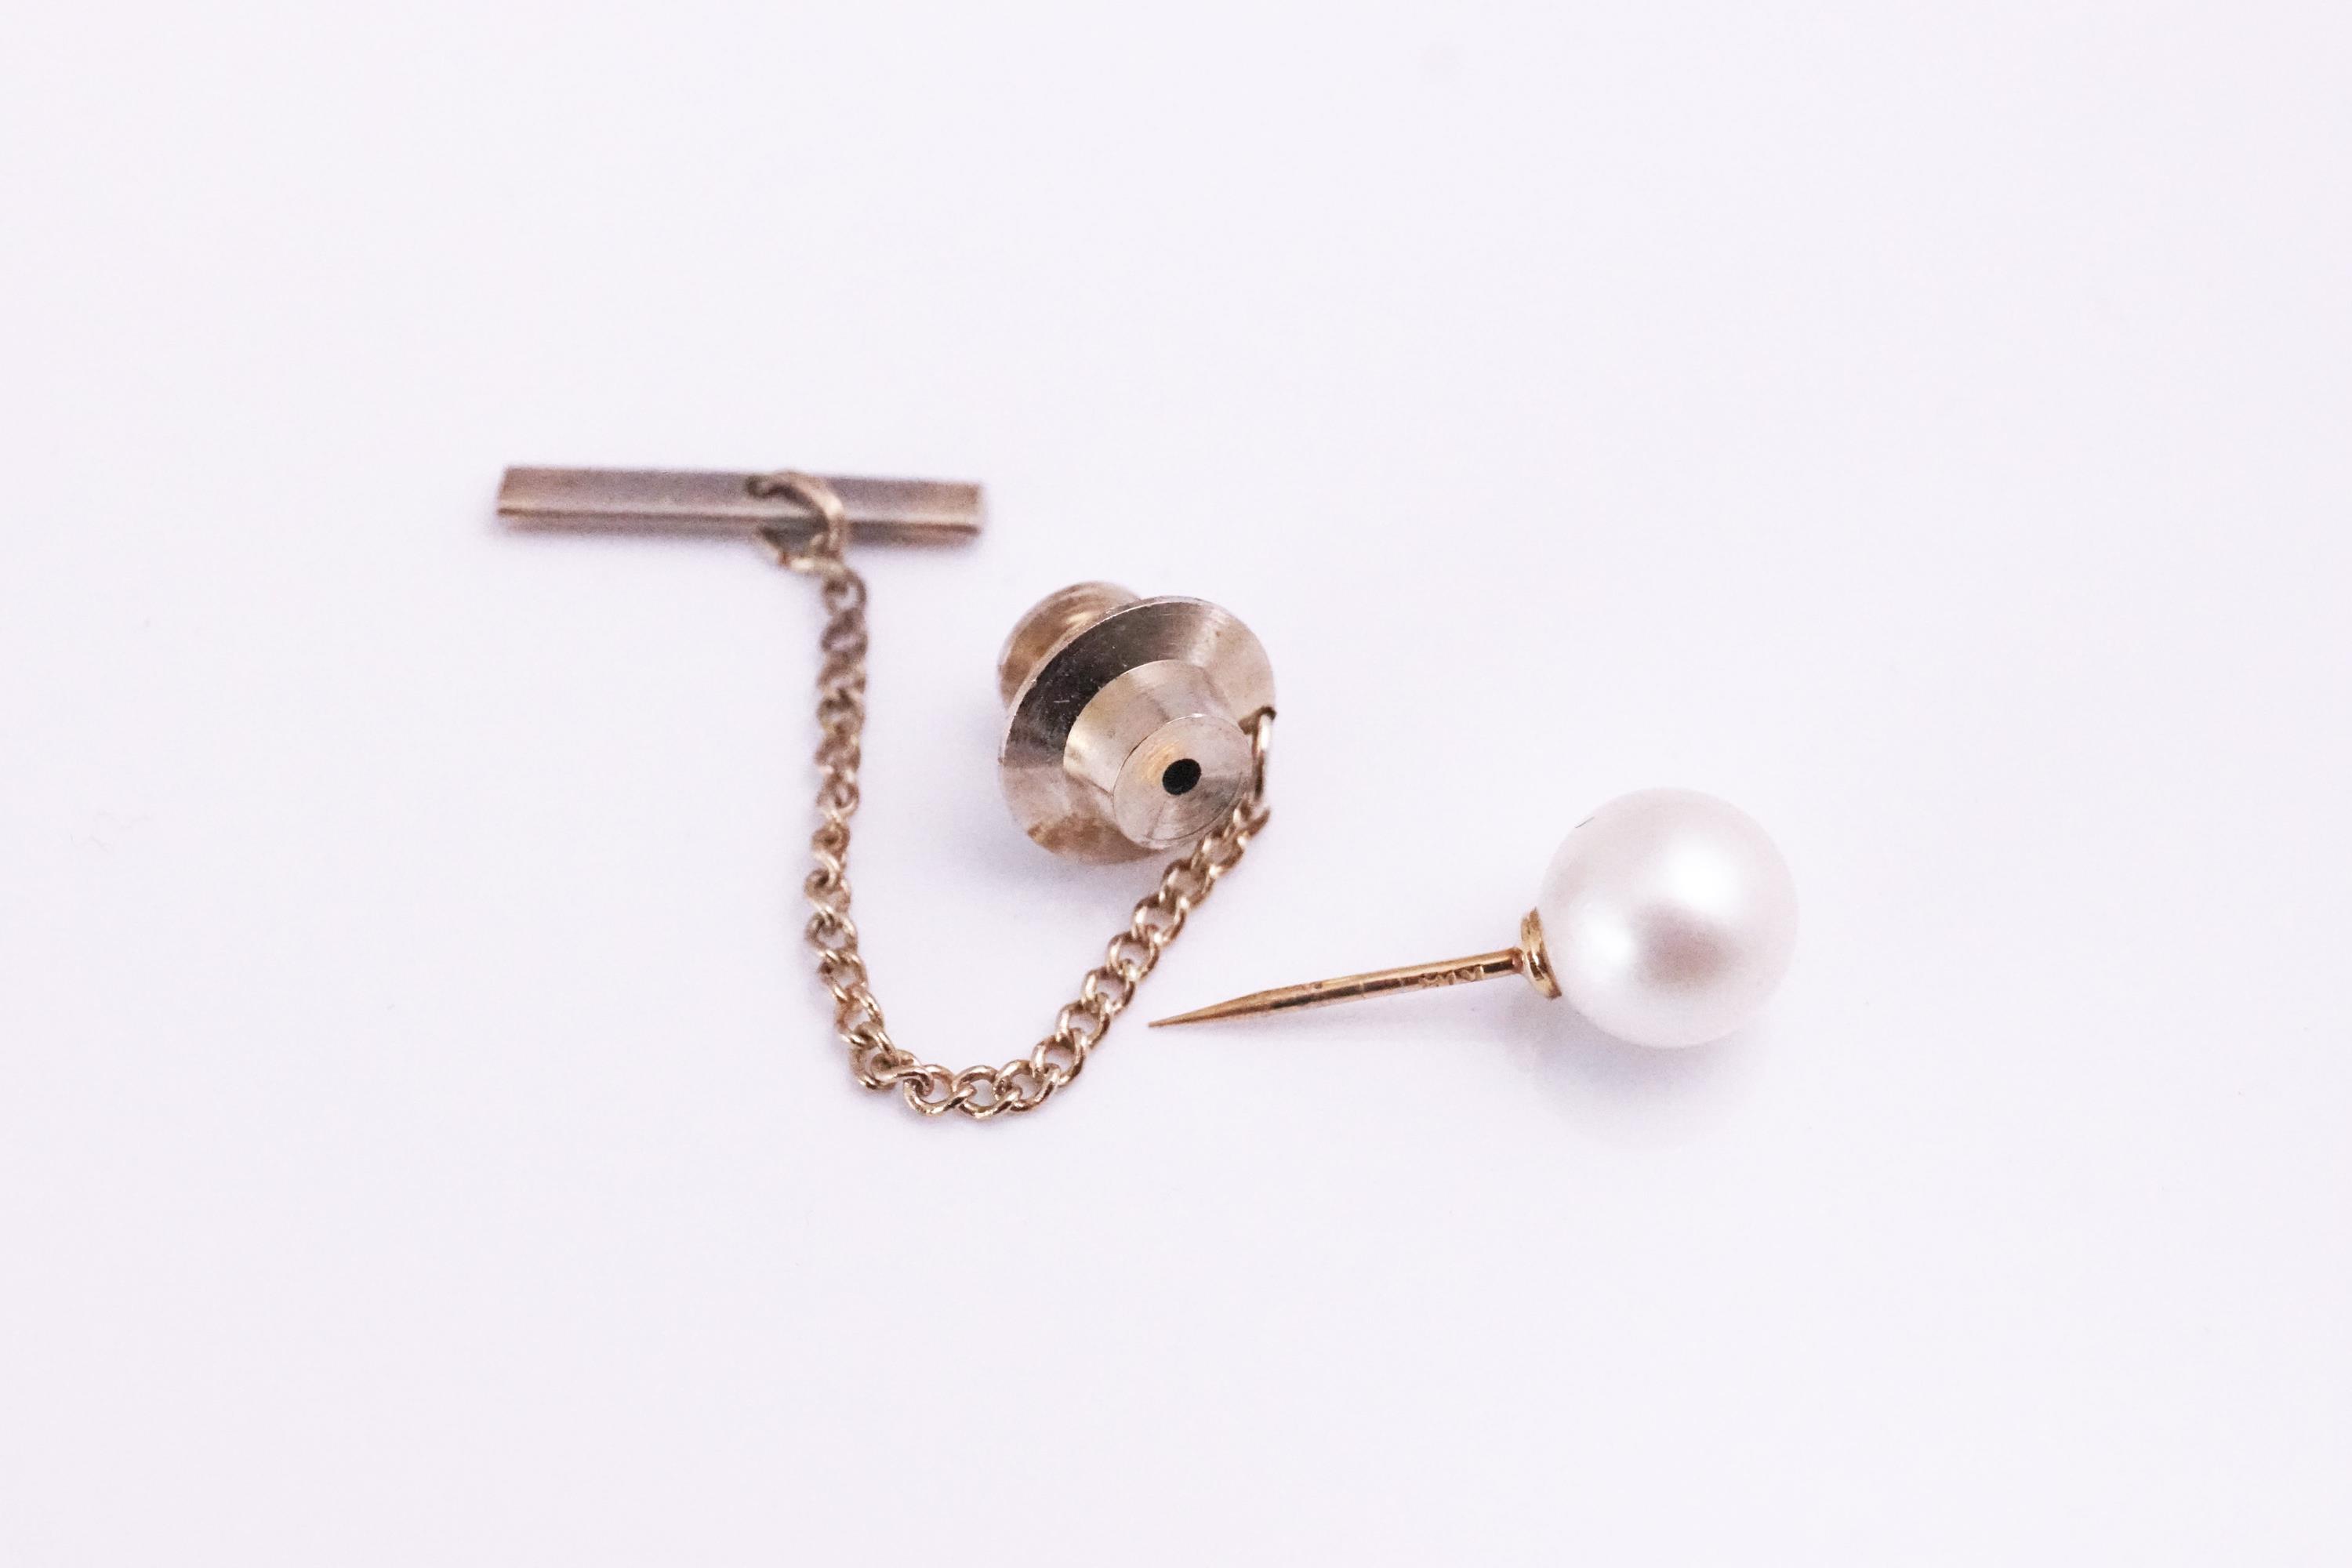 A tie pin set with an 8mm white cultured pearl together with a single strand of simulated pearls - Image 2 of 2